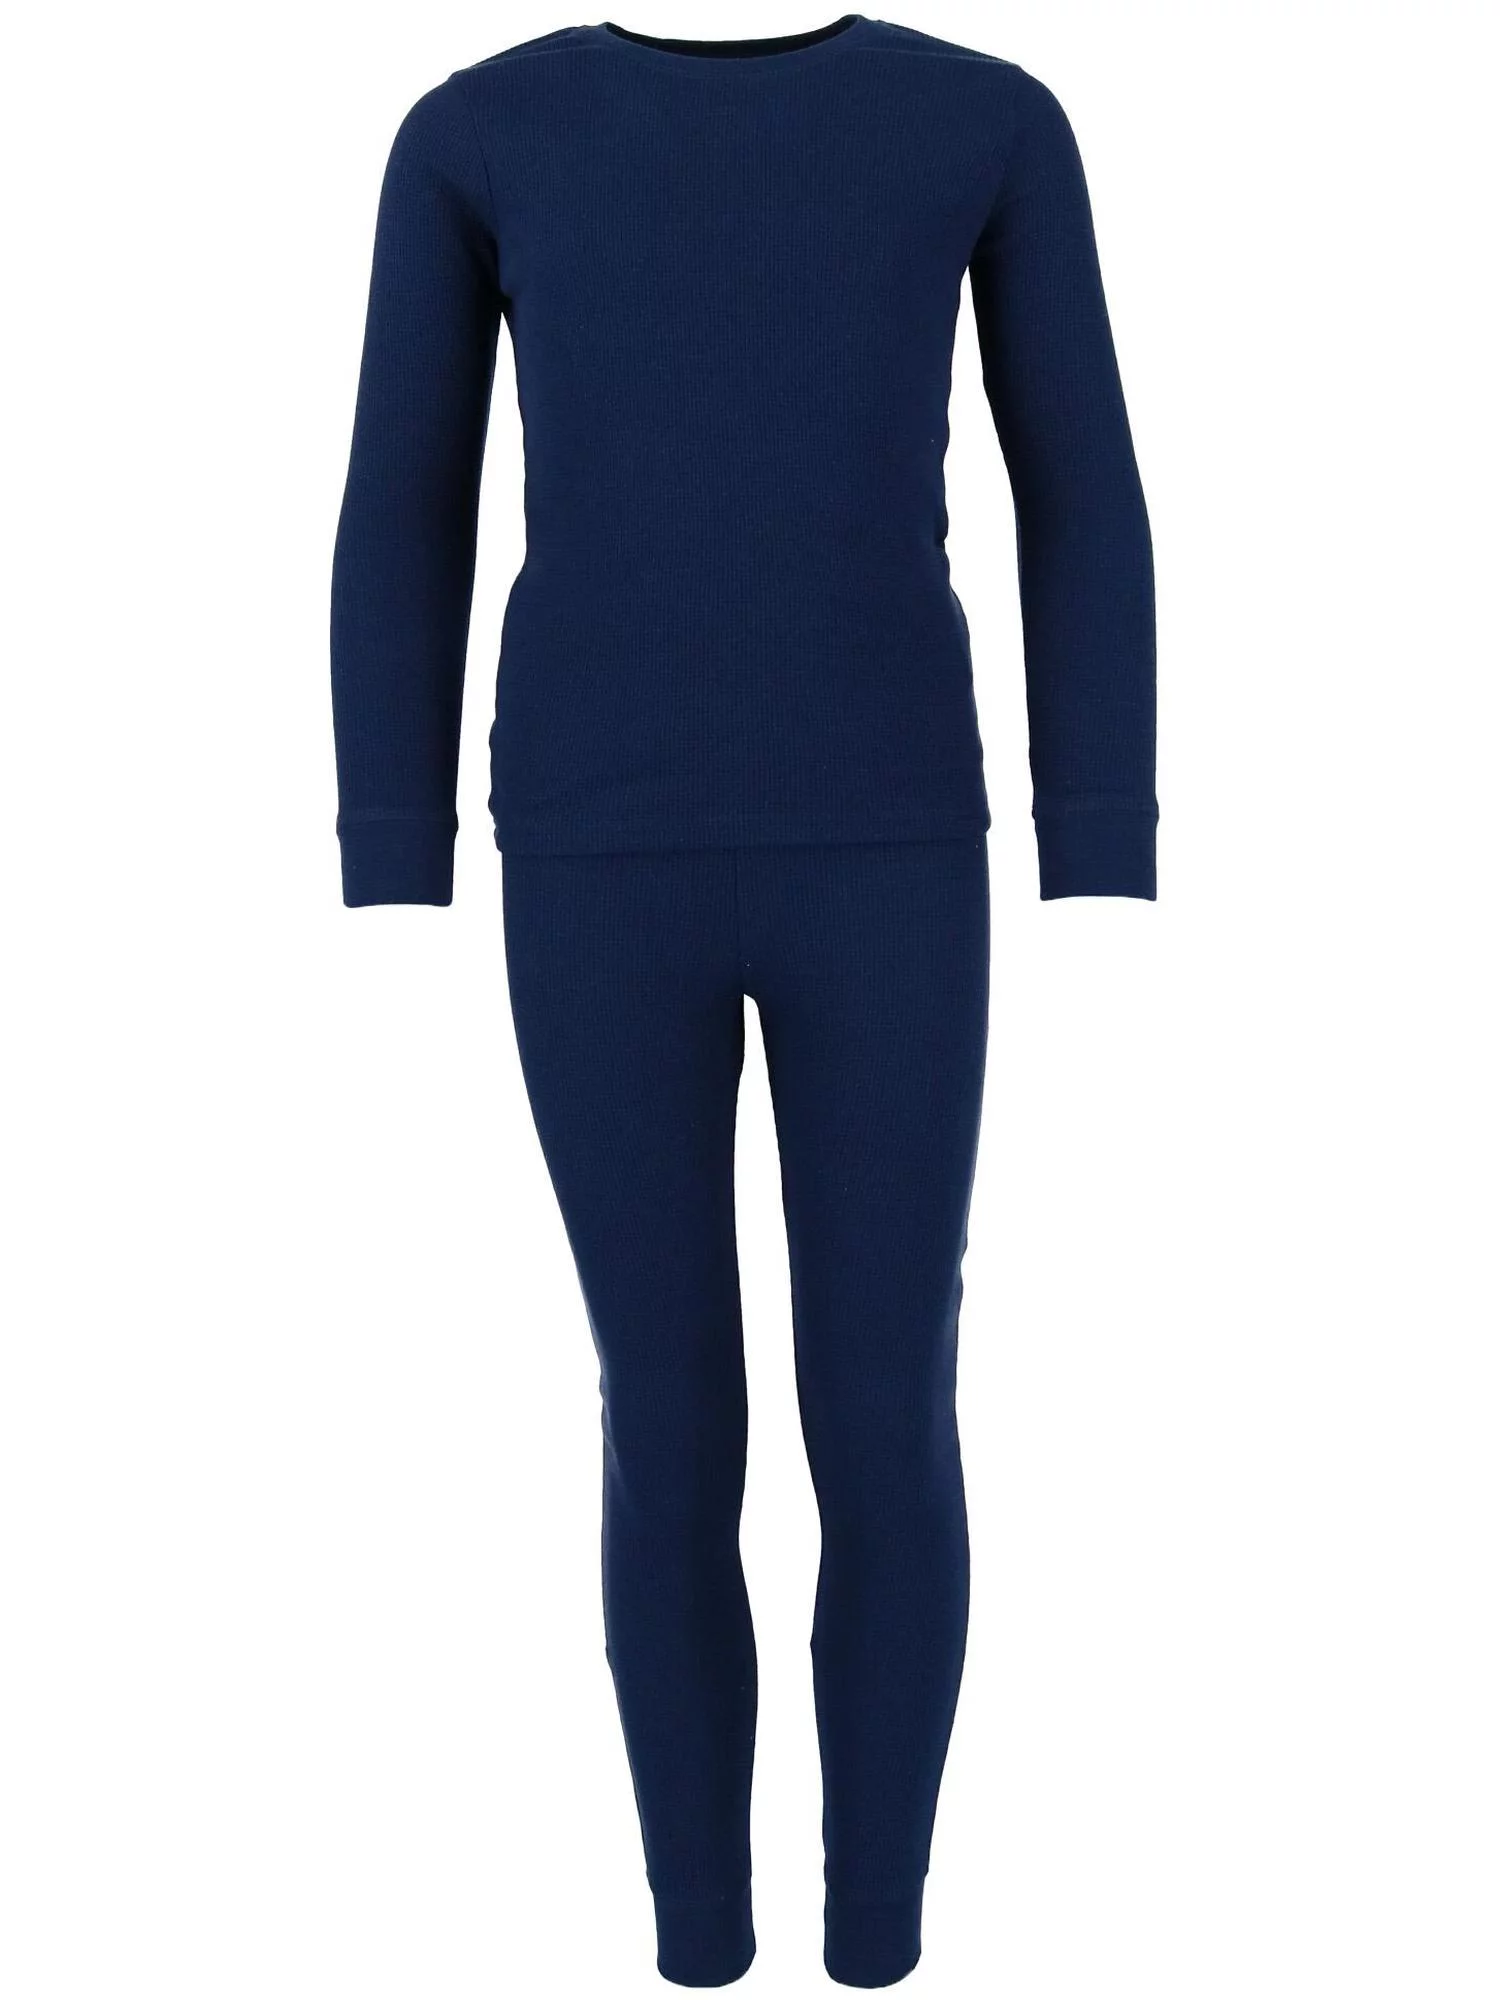 Boys Only Kid's Waffle Thermal Long Underwear 2-Piece Set